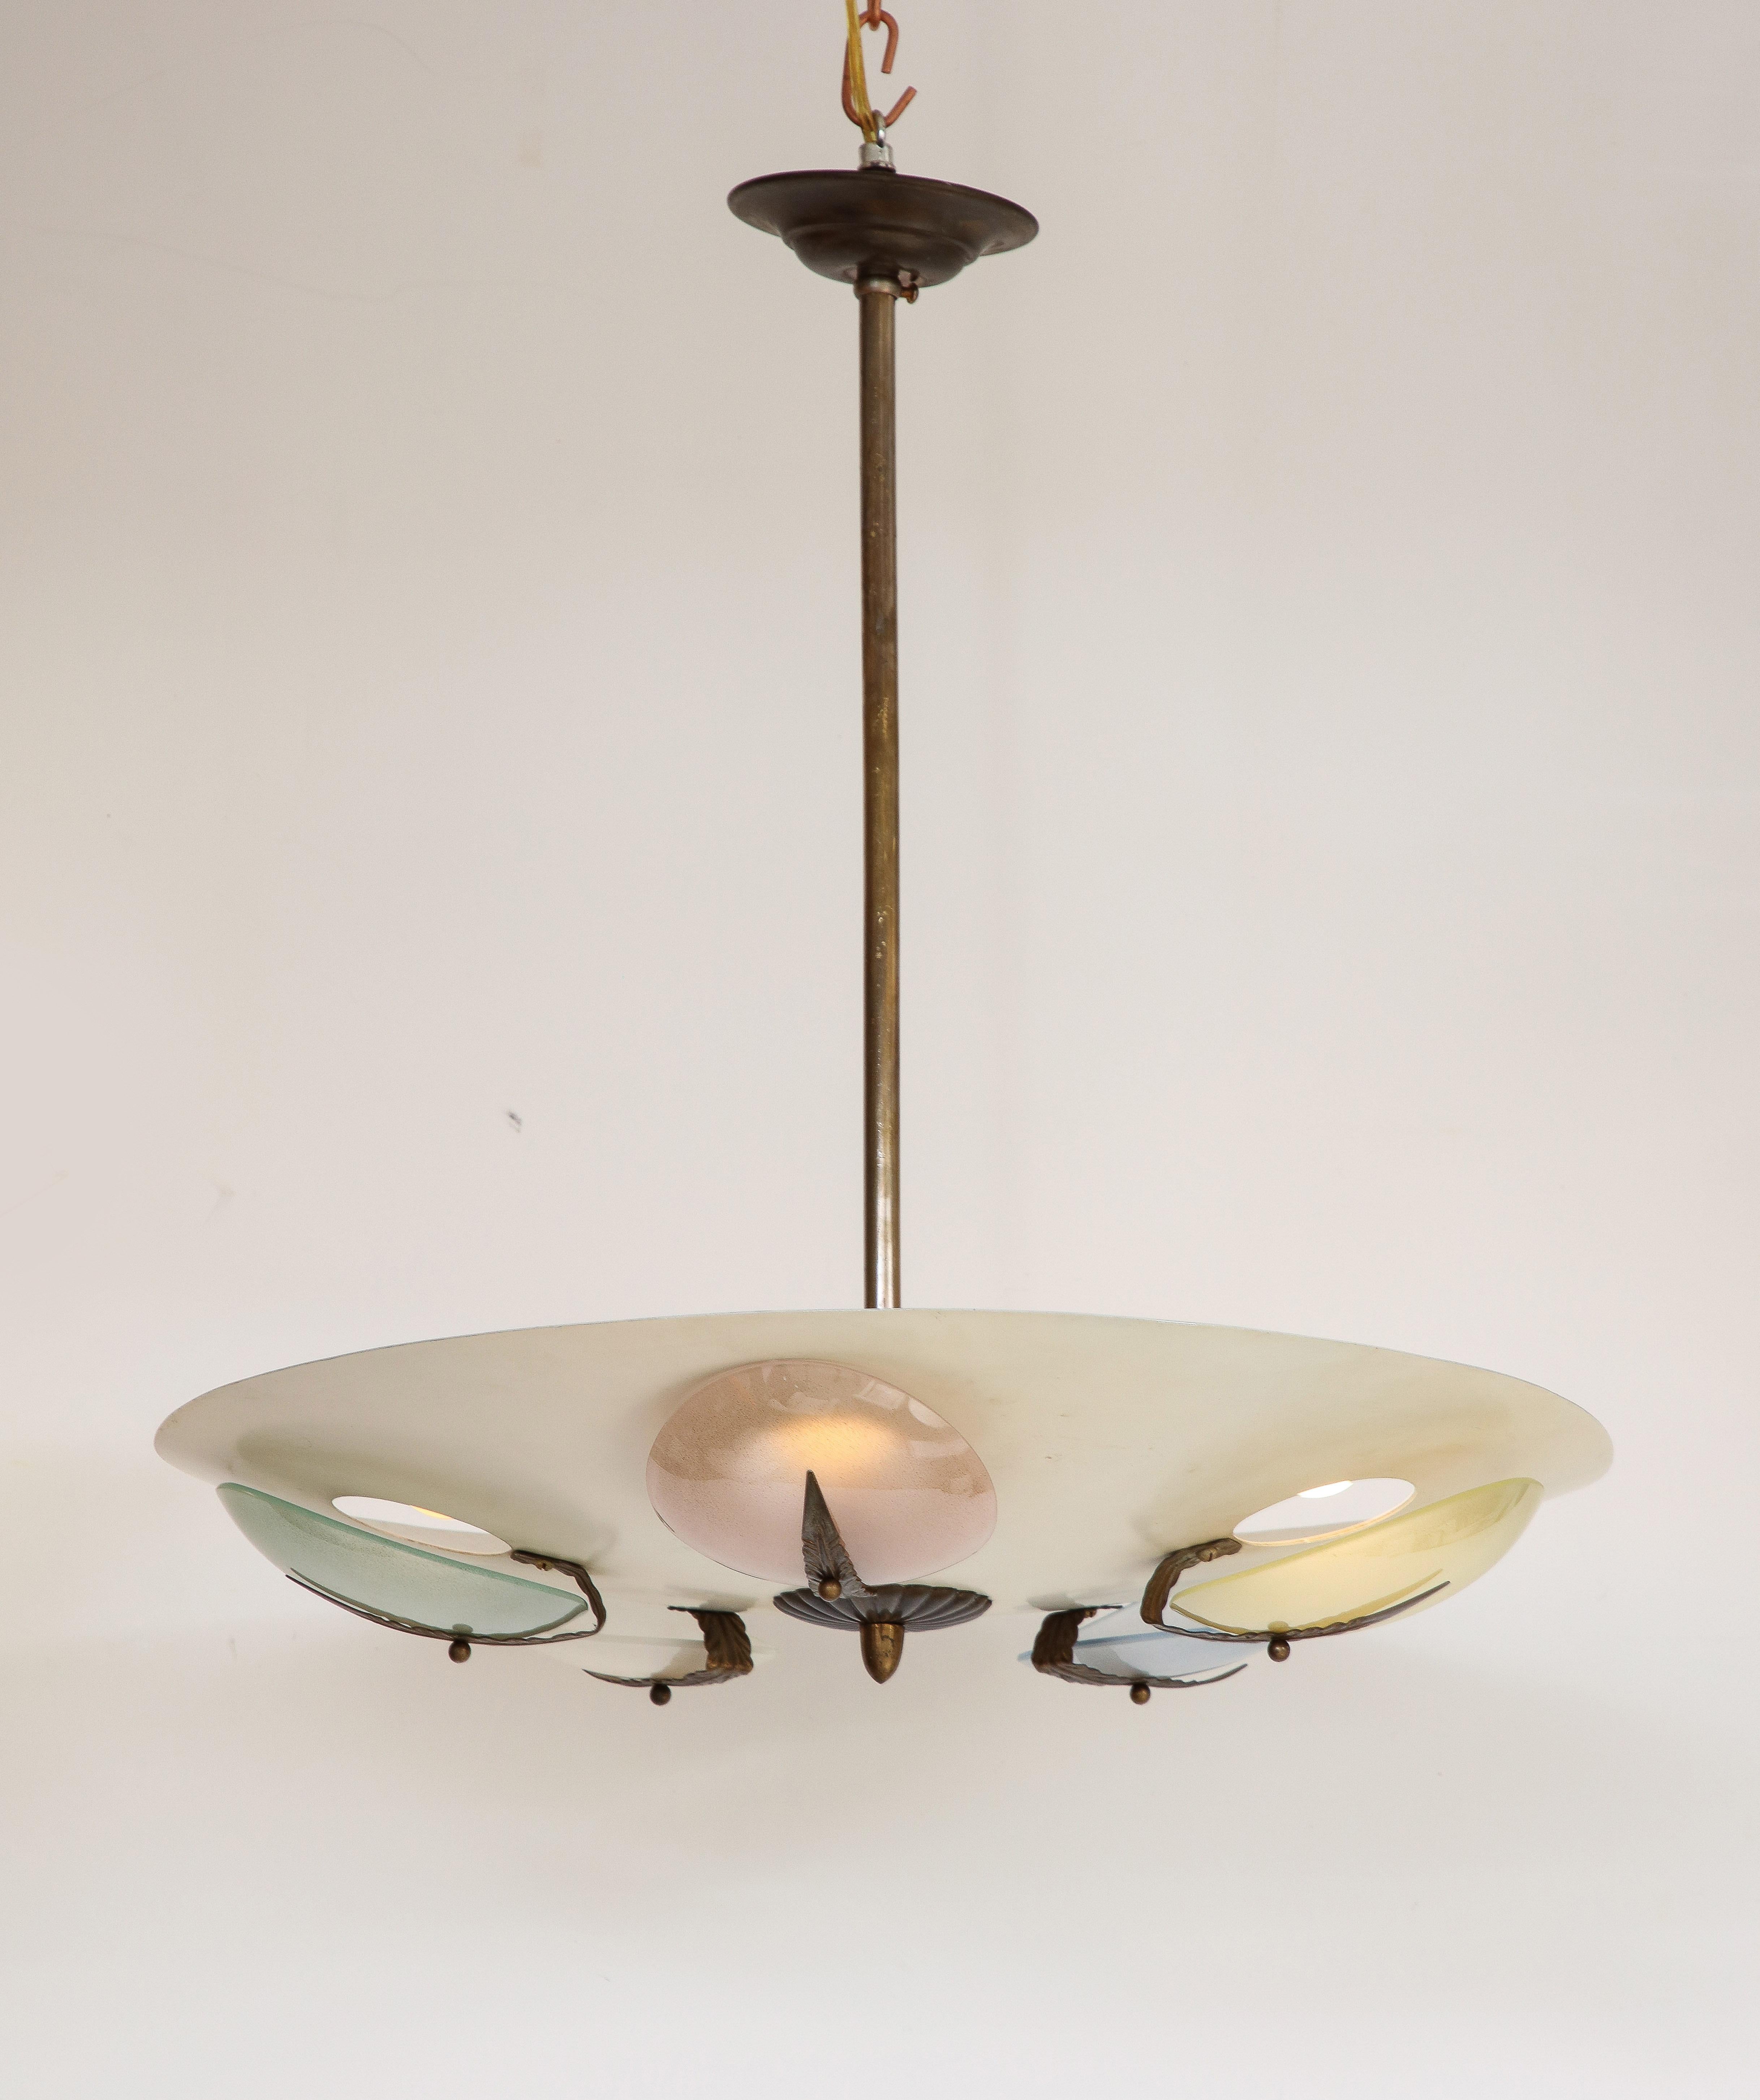 A highly unique Italian pendant chandelier, circa 1950. 
The circular creamy white painted enamel metal pendant is decorated with five oval shaped pastel colored discs, (pale pink, seafoam green, periwinkle blue, white, and pale yellow), with each